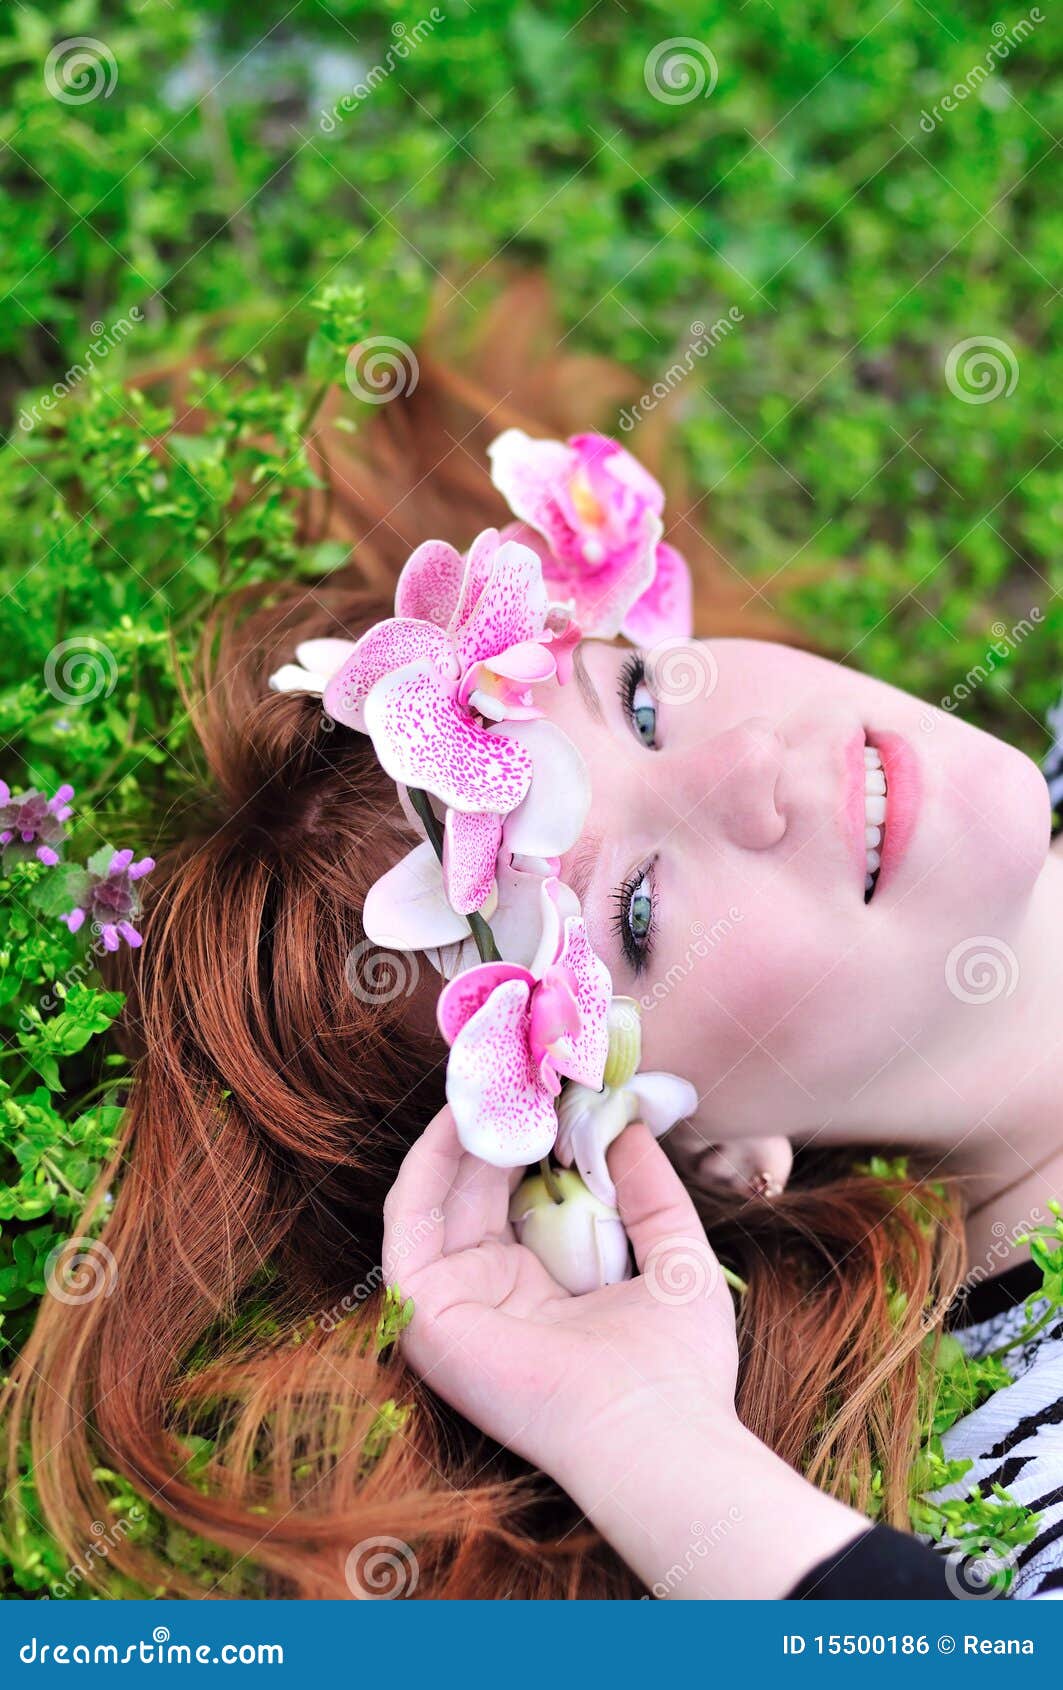 girl with orchid in hair